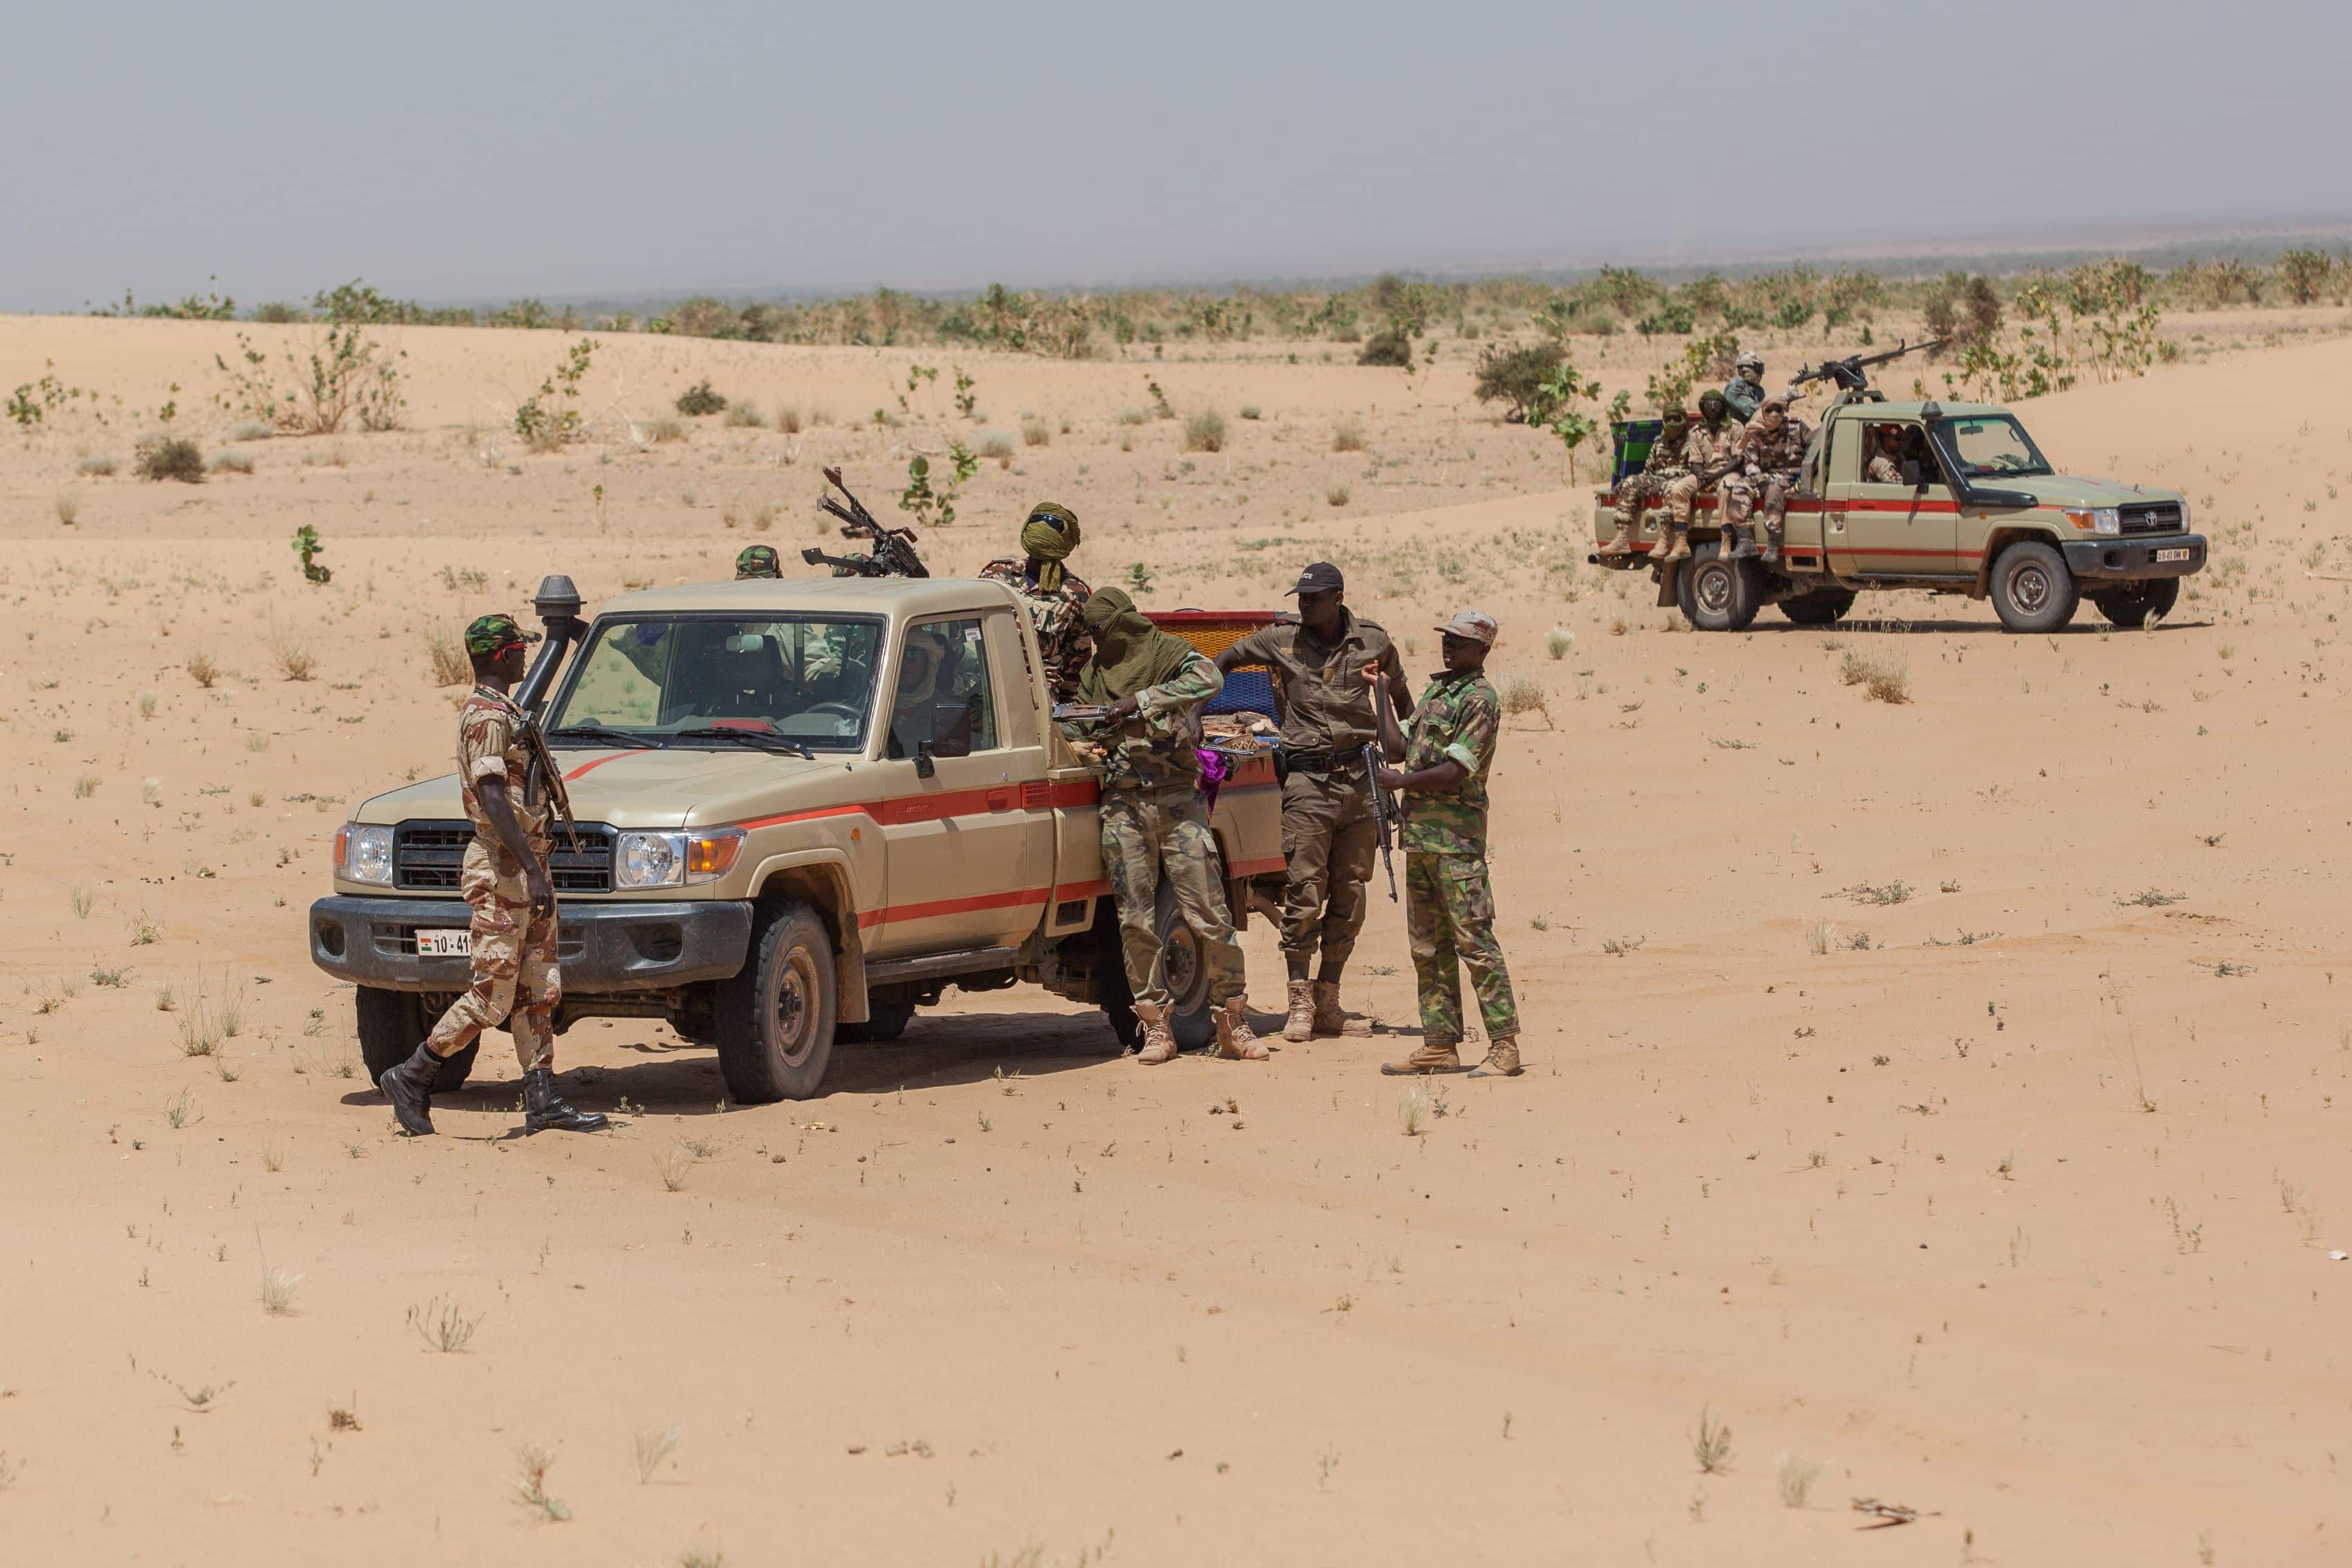 Niger - september 2013: Governmental military guard in North Africa Cars with armed soldiers desert border Libya Niger